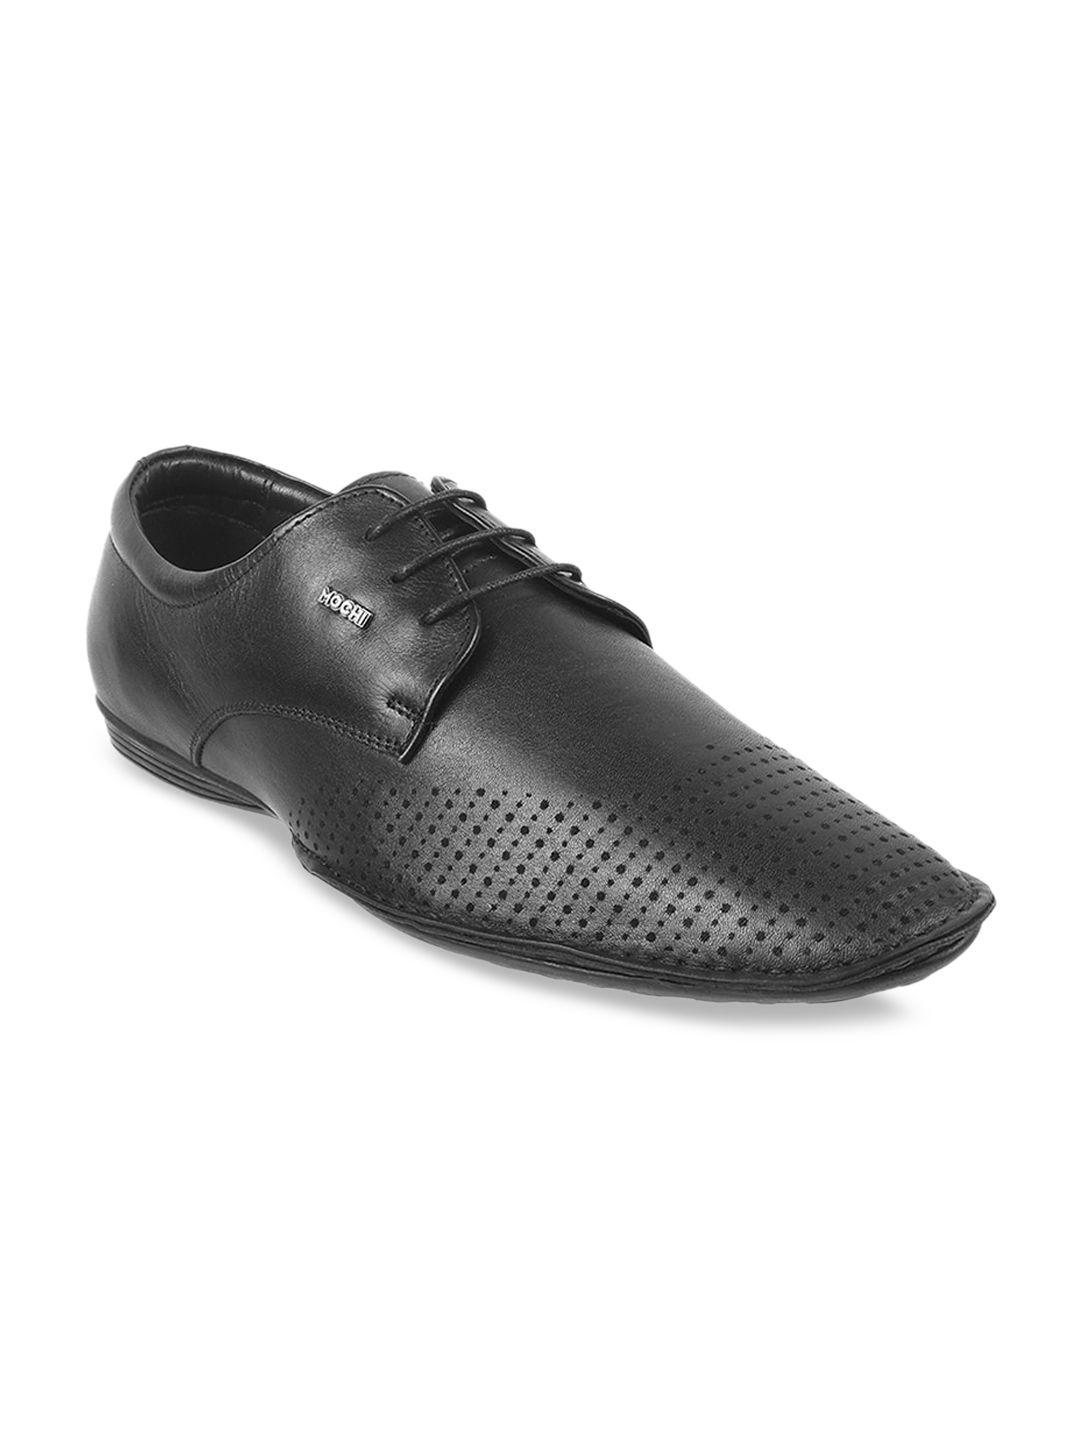 mochi-men-black-solid-leather-formal-derbys-with-perforated-detail